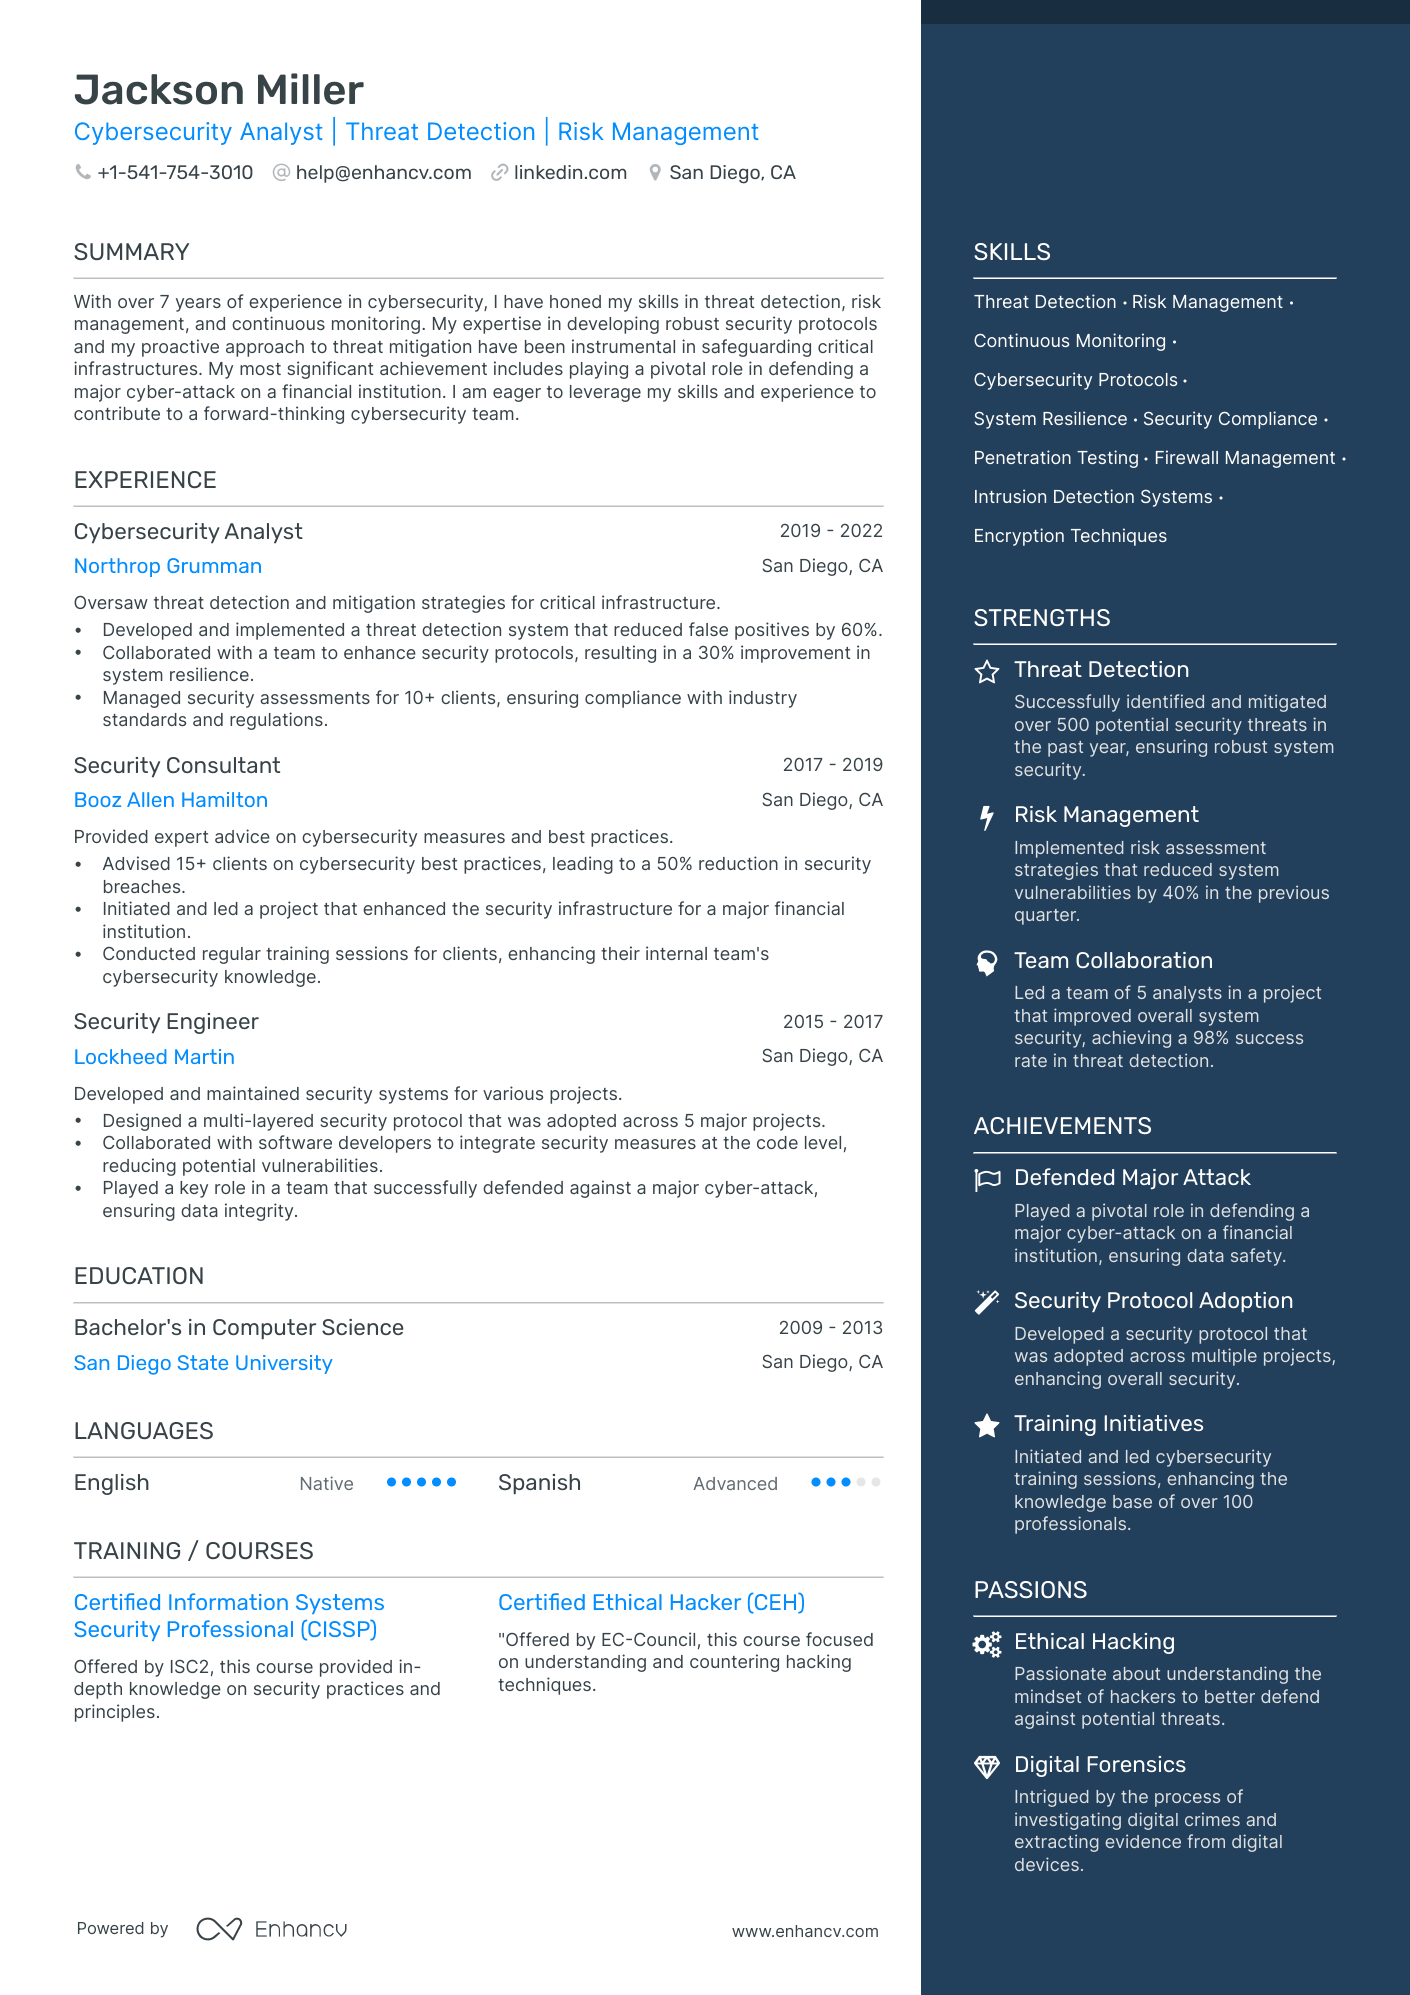 Cyber Security Analyst resume example